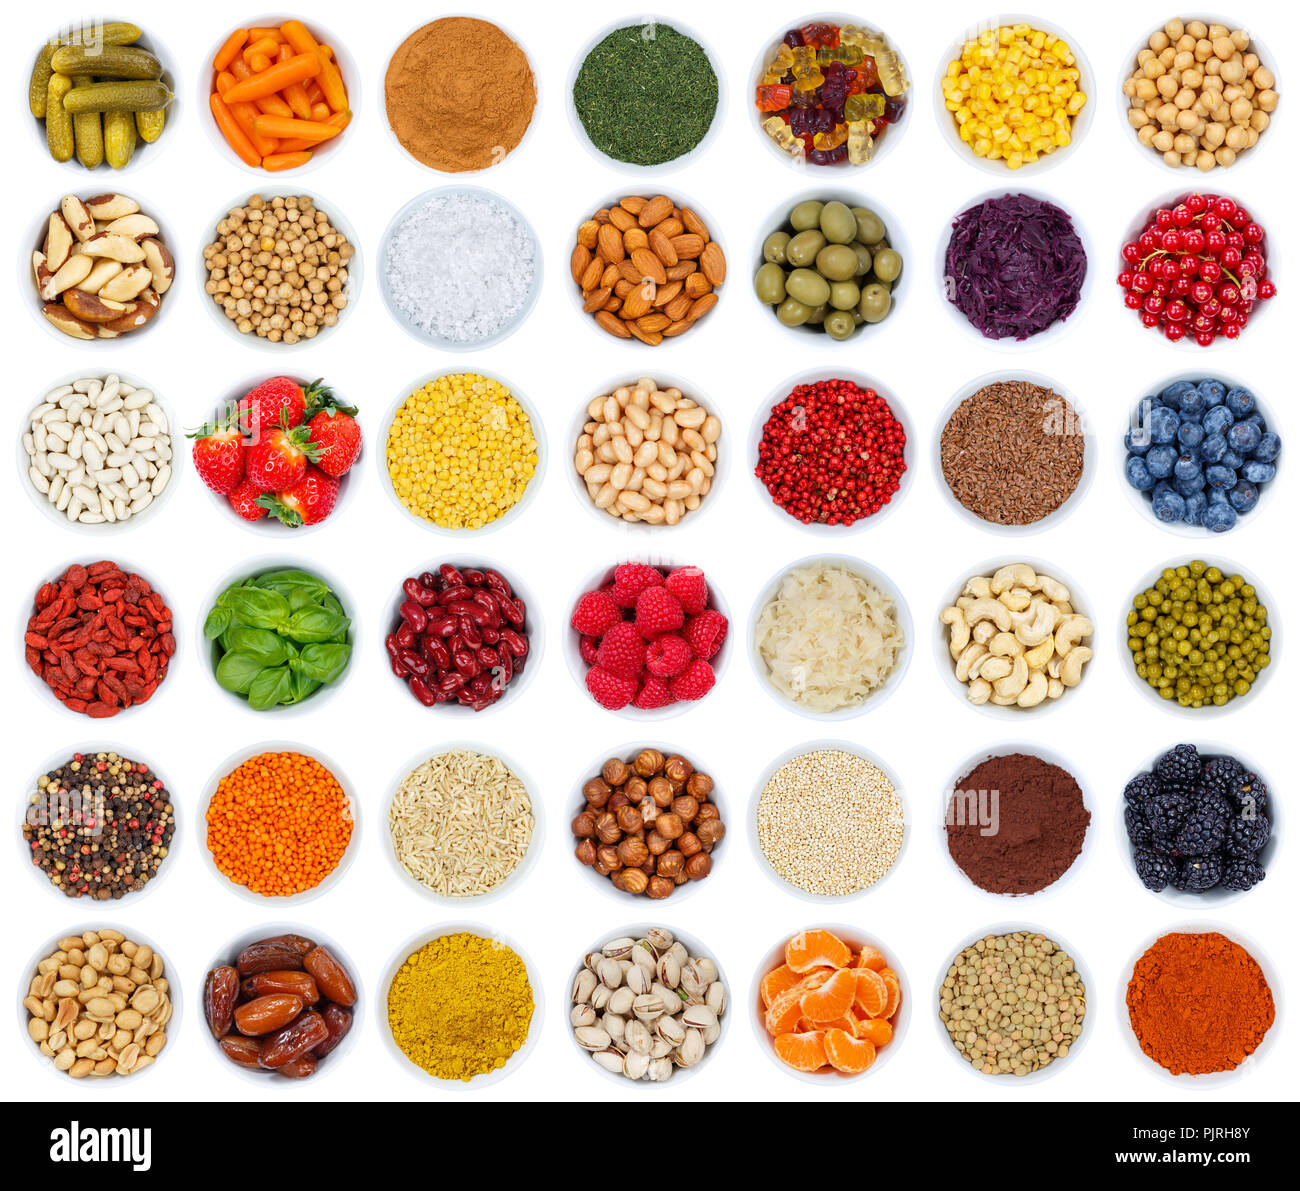 Fruits and vegetables berries spices herbs from above isolated on a white background Stock Photo